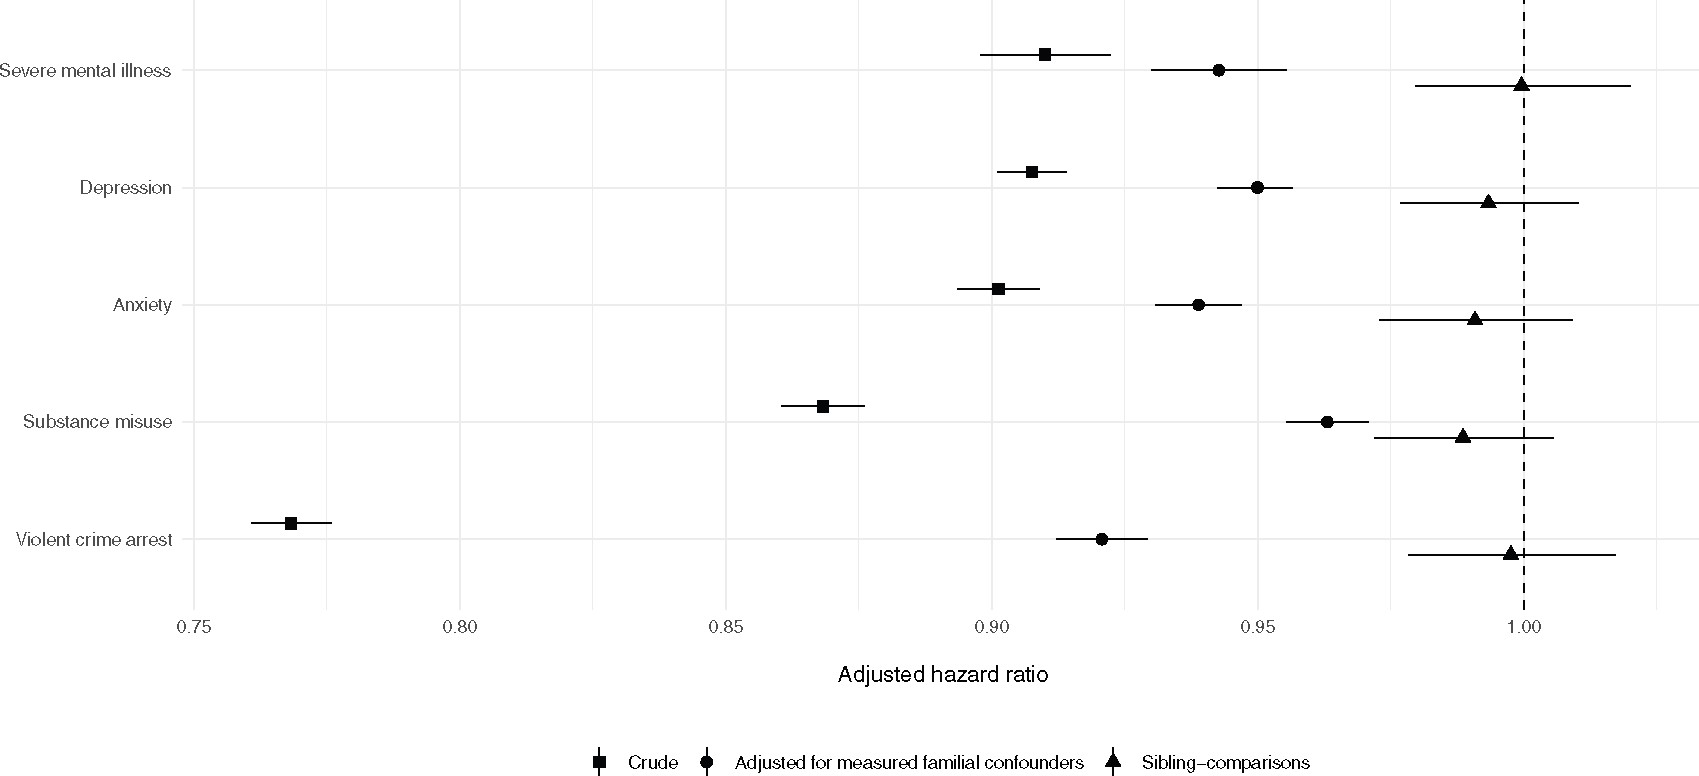 Sariaslan Figure 1: attenuated effect of income on mental health within sibling pairs